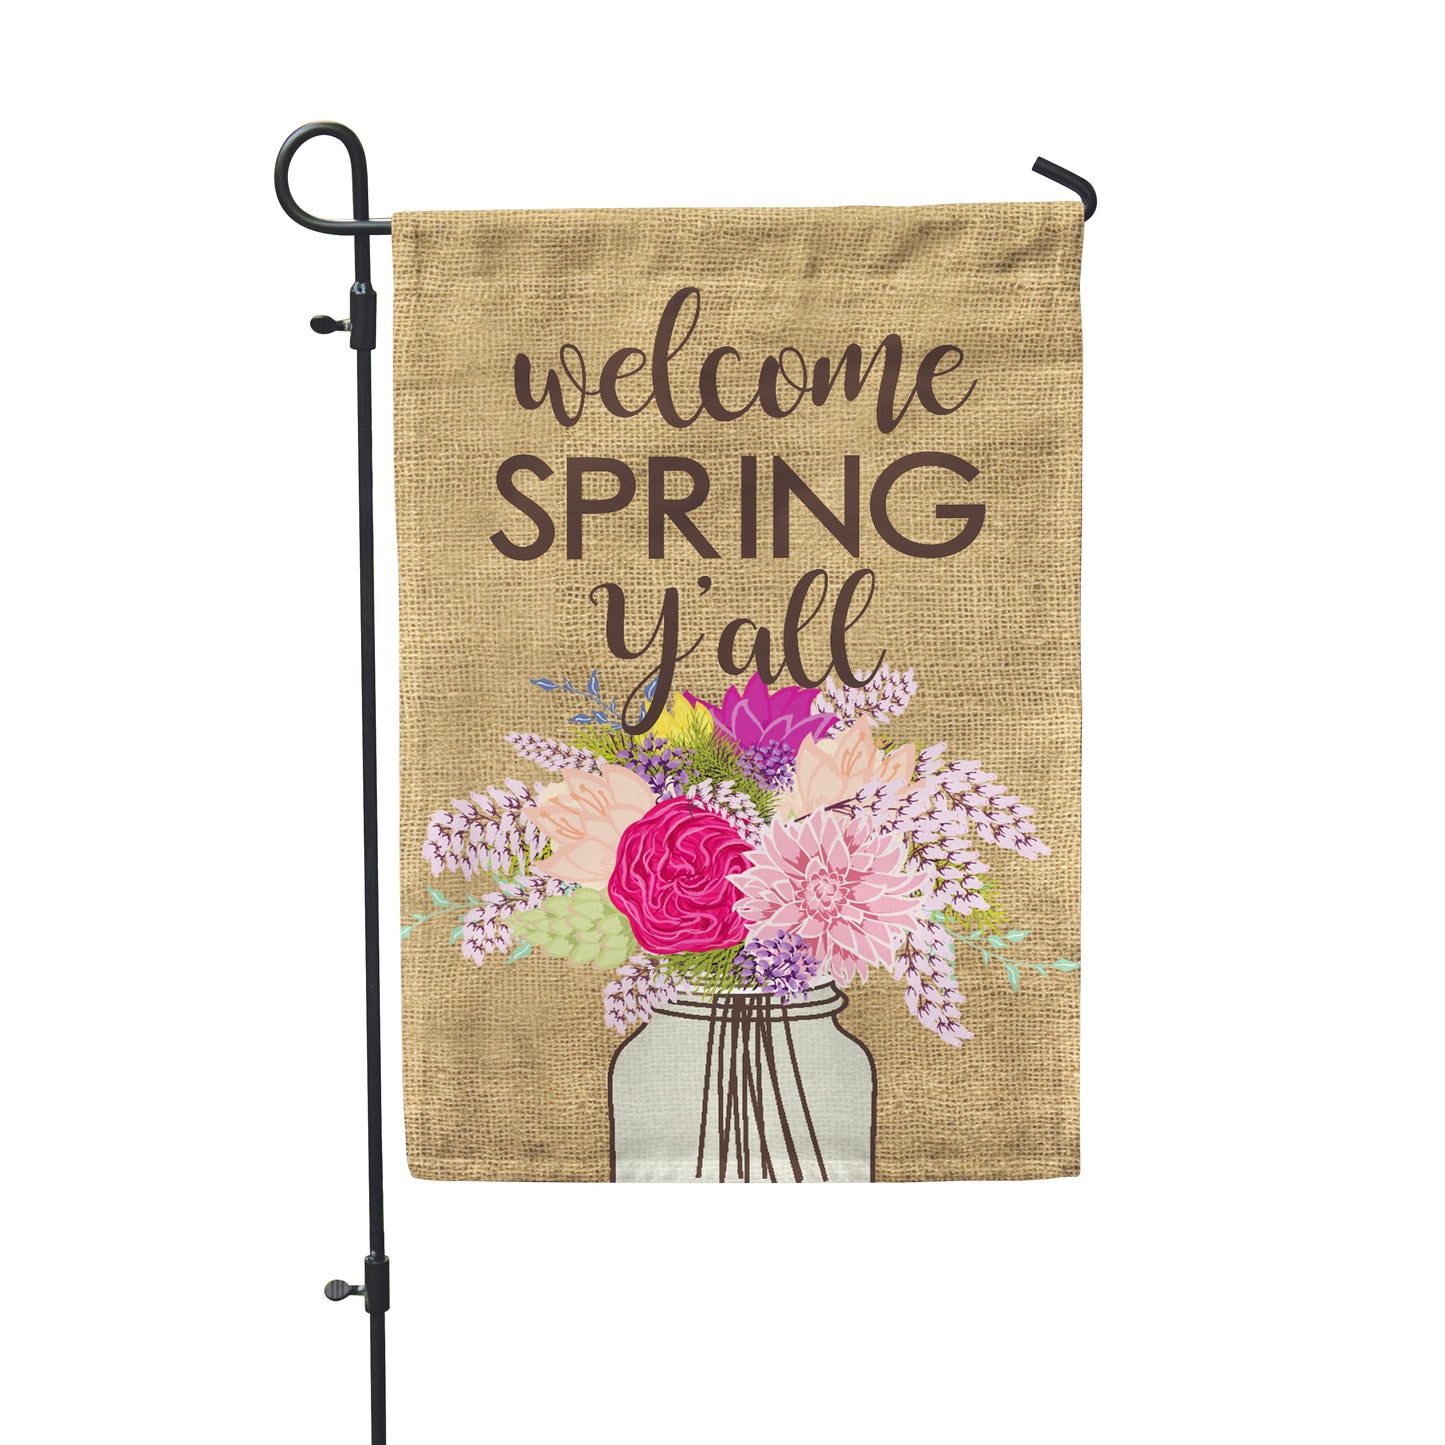 Welcome Spring Y'all Garden Flag - Second East